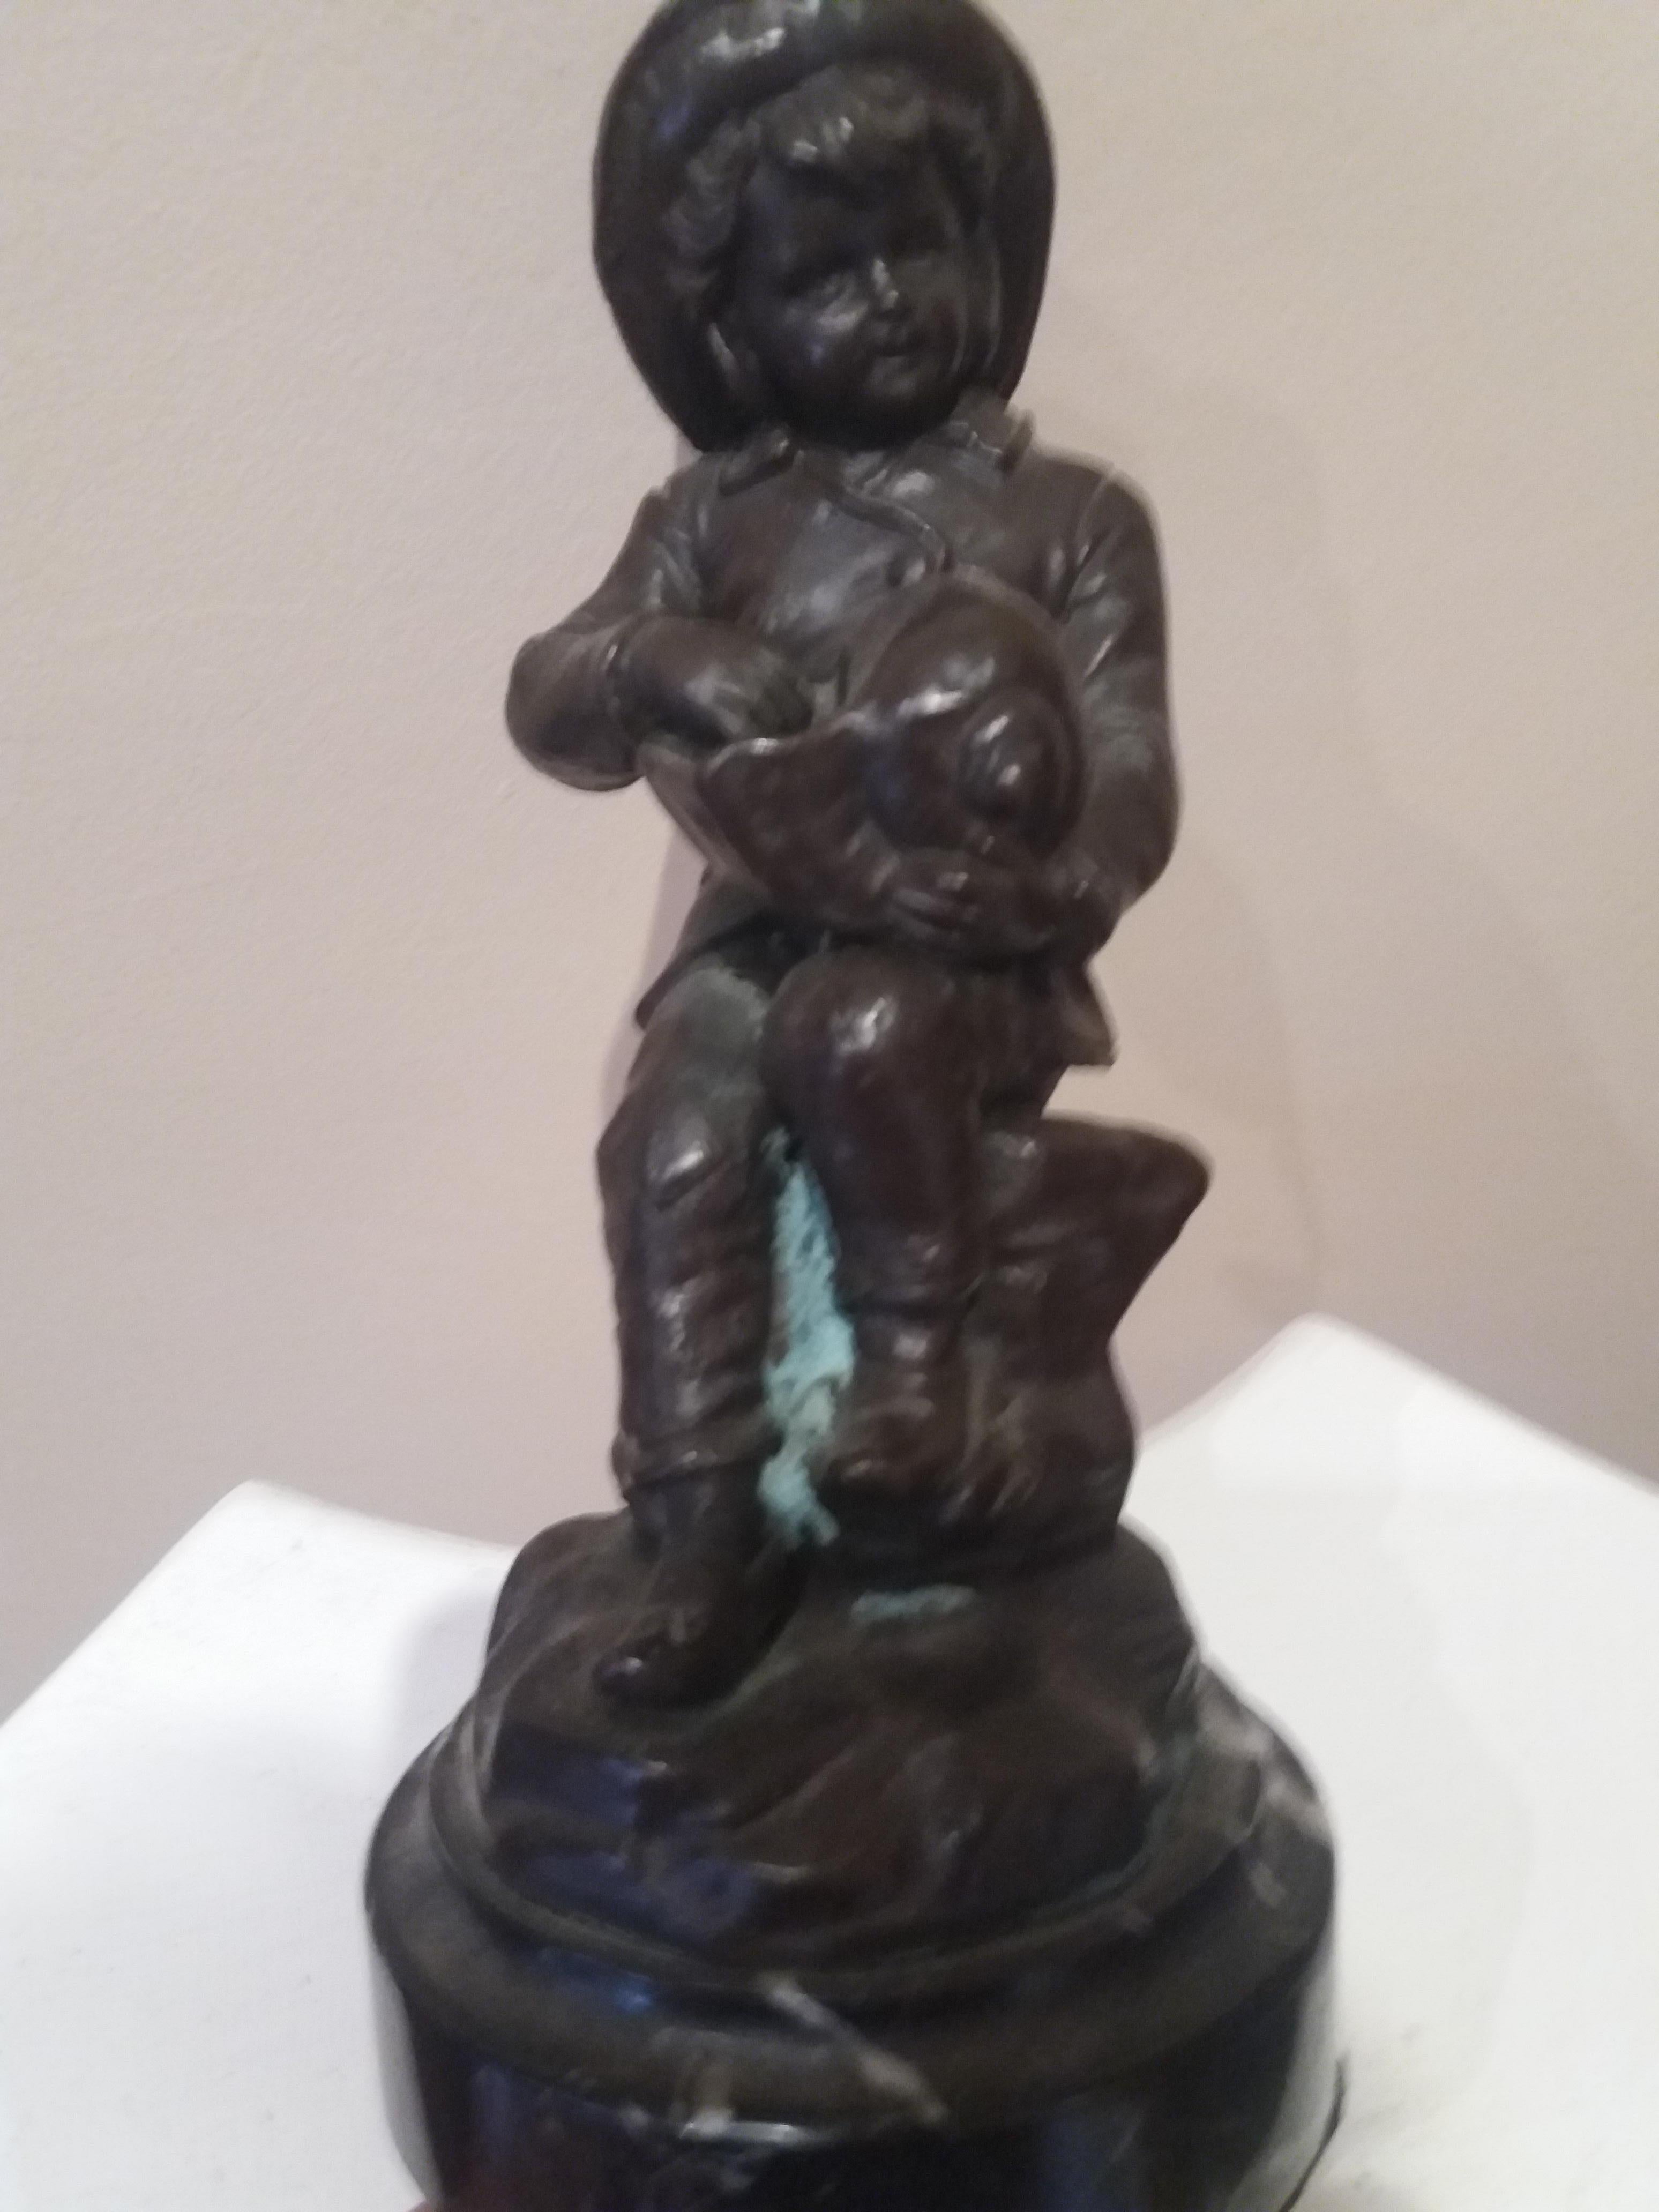  Bollel 23  Child and conch shell. Original multiple bronze sculpture 2